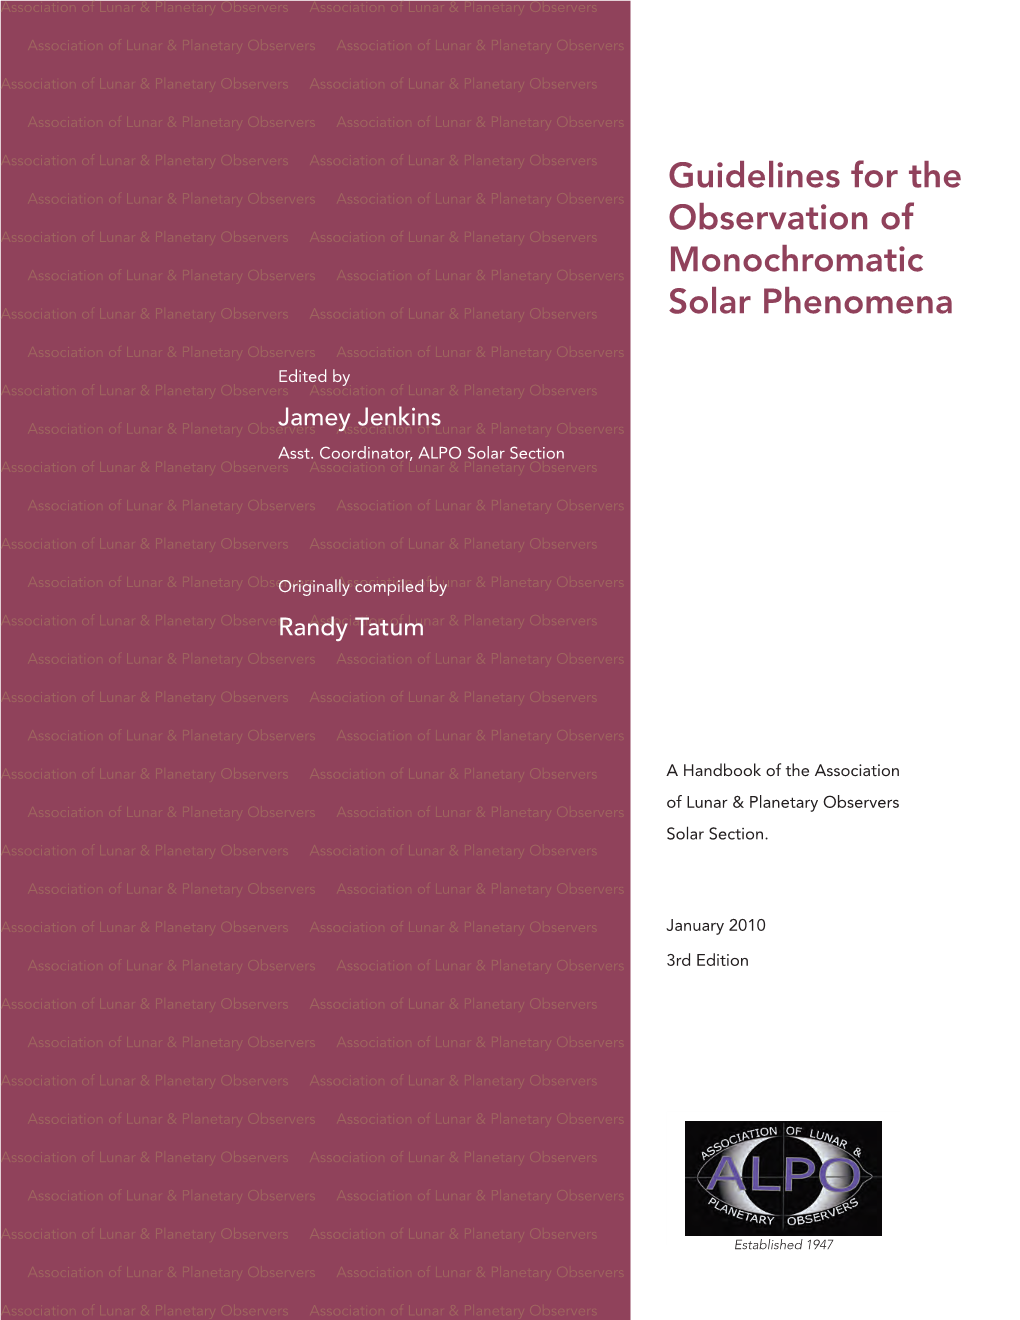 Guidelines for the Observing Monochromatic Solar Phenomena